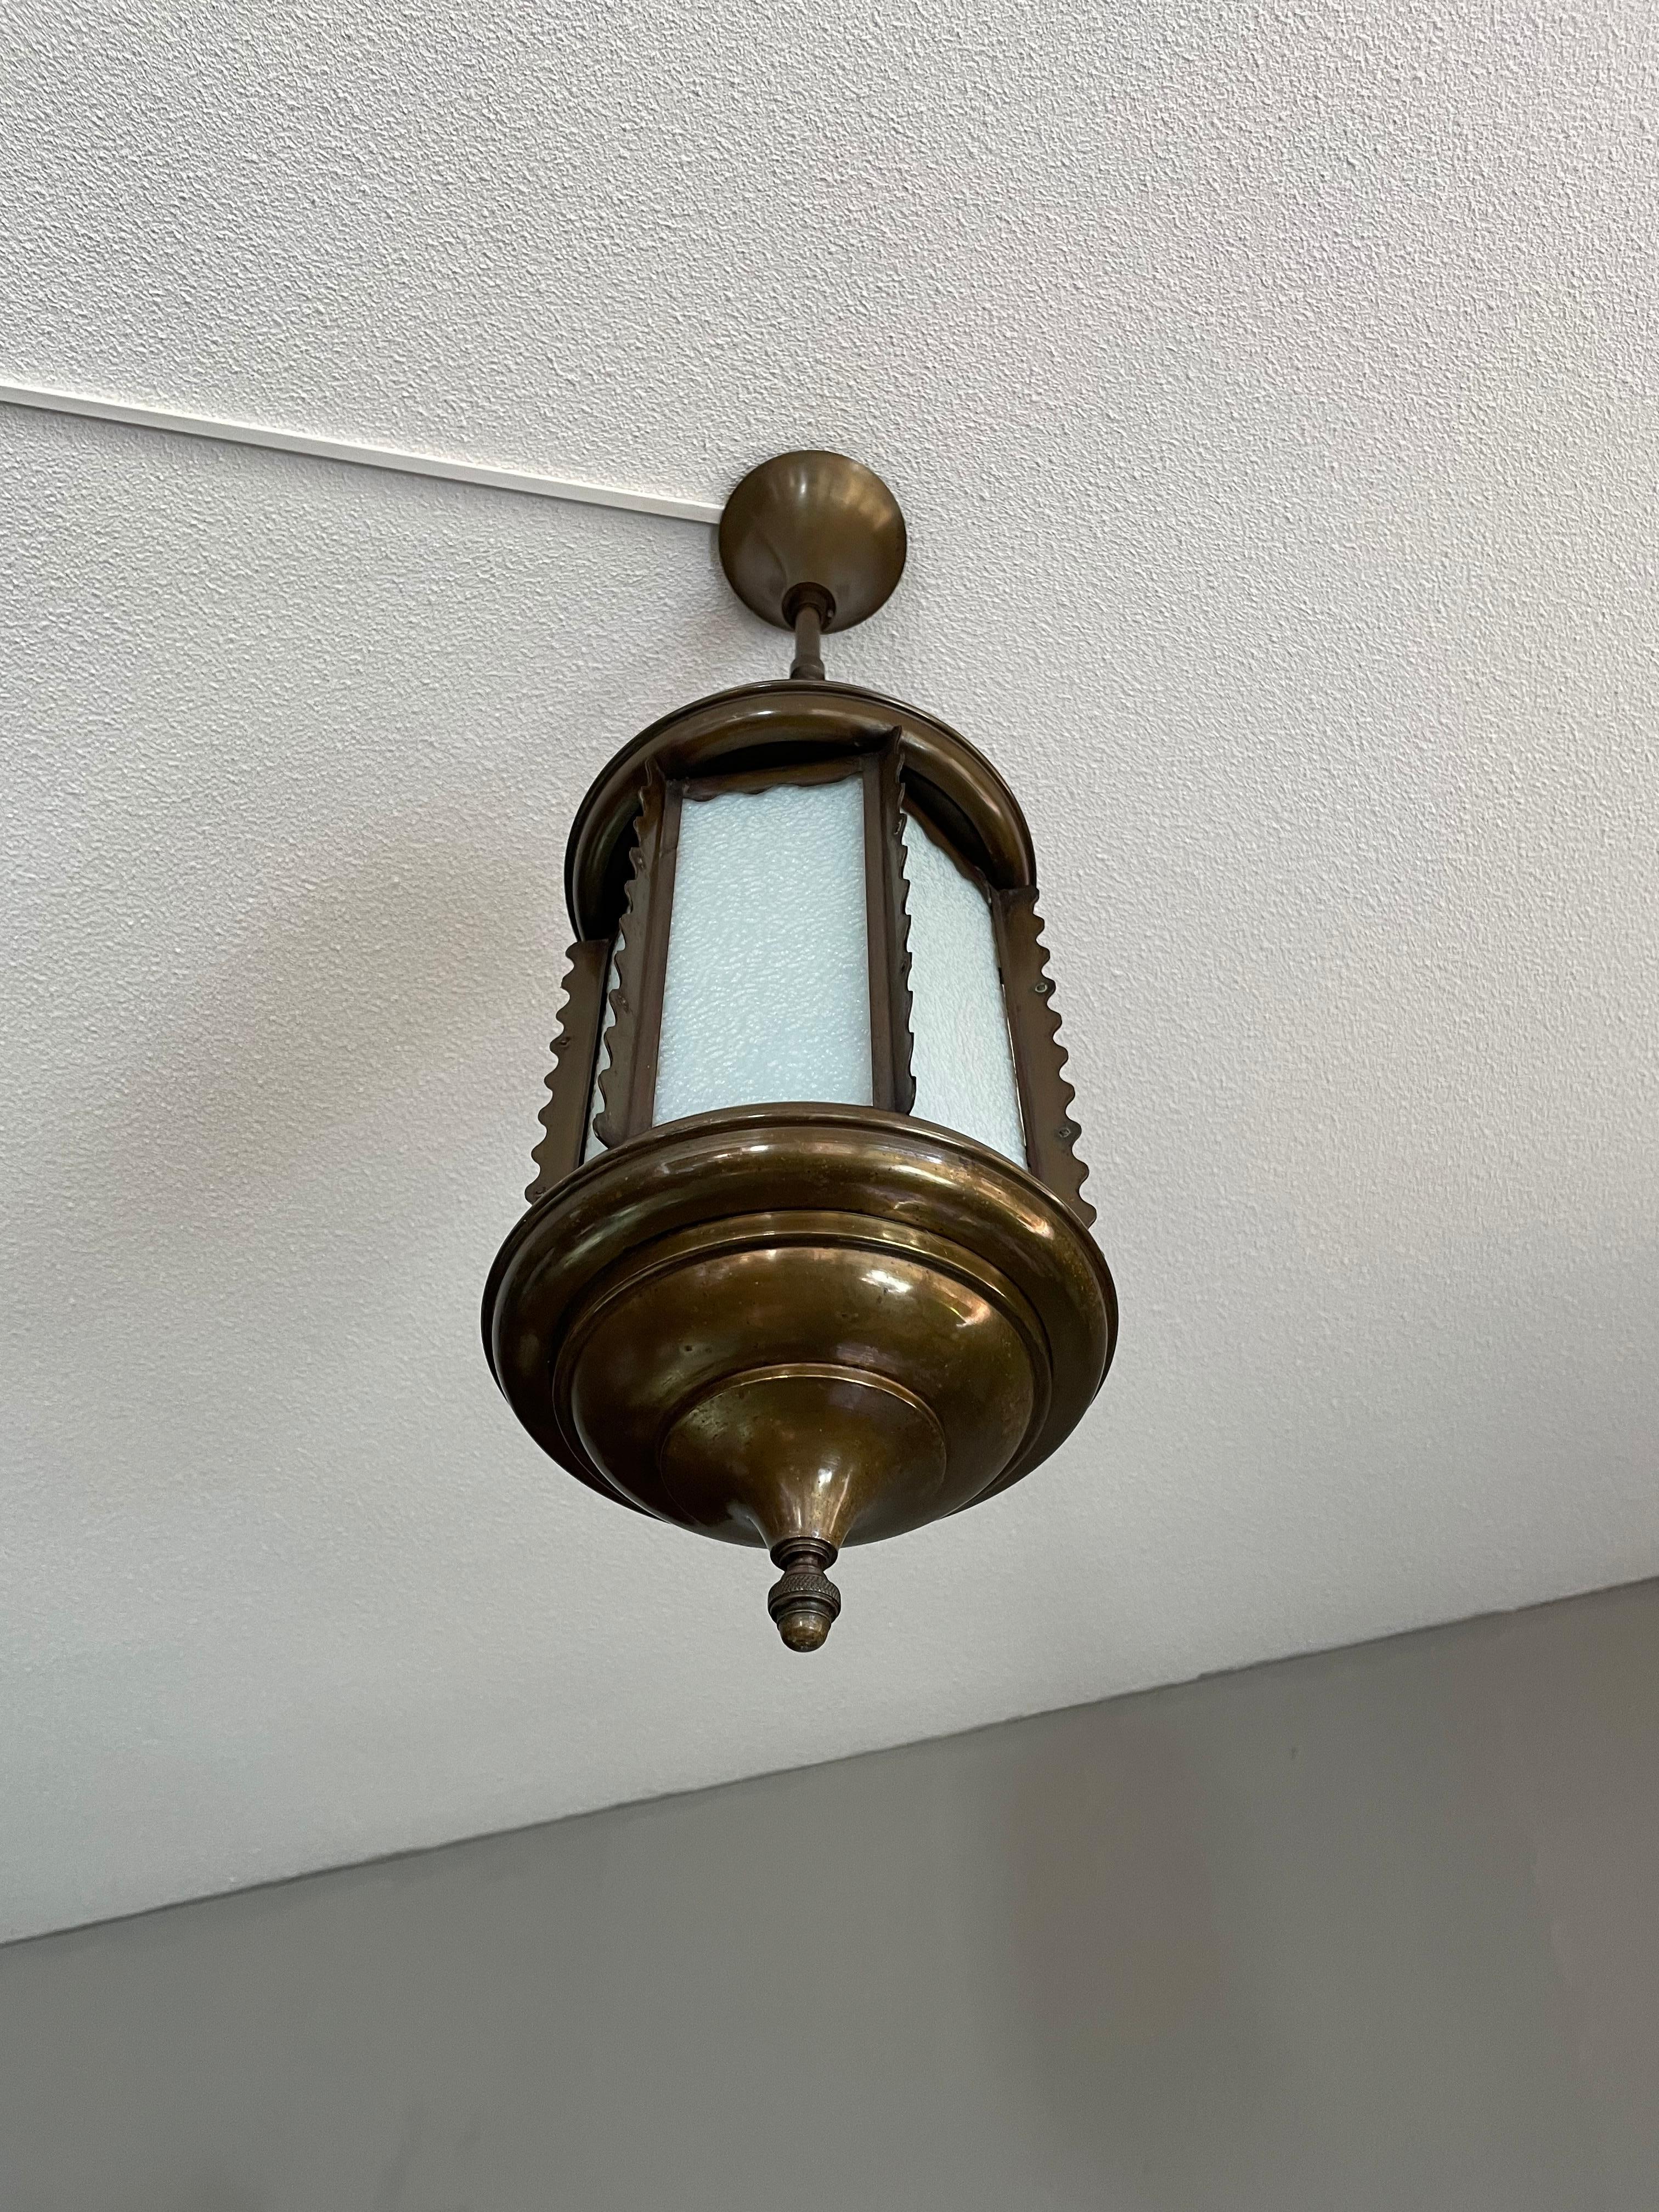 Stunning and good size Arts and Crafts ceiling lamp.

If you are looking for the ideal pendant to light up your entrance or bedroom then this antique work of beauty could be perfect. This European Arts and Crafts pendant is beautiful in shape, made